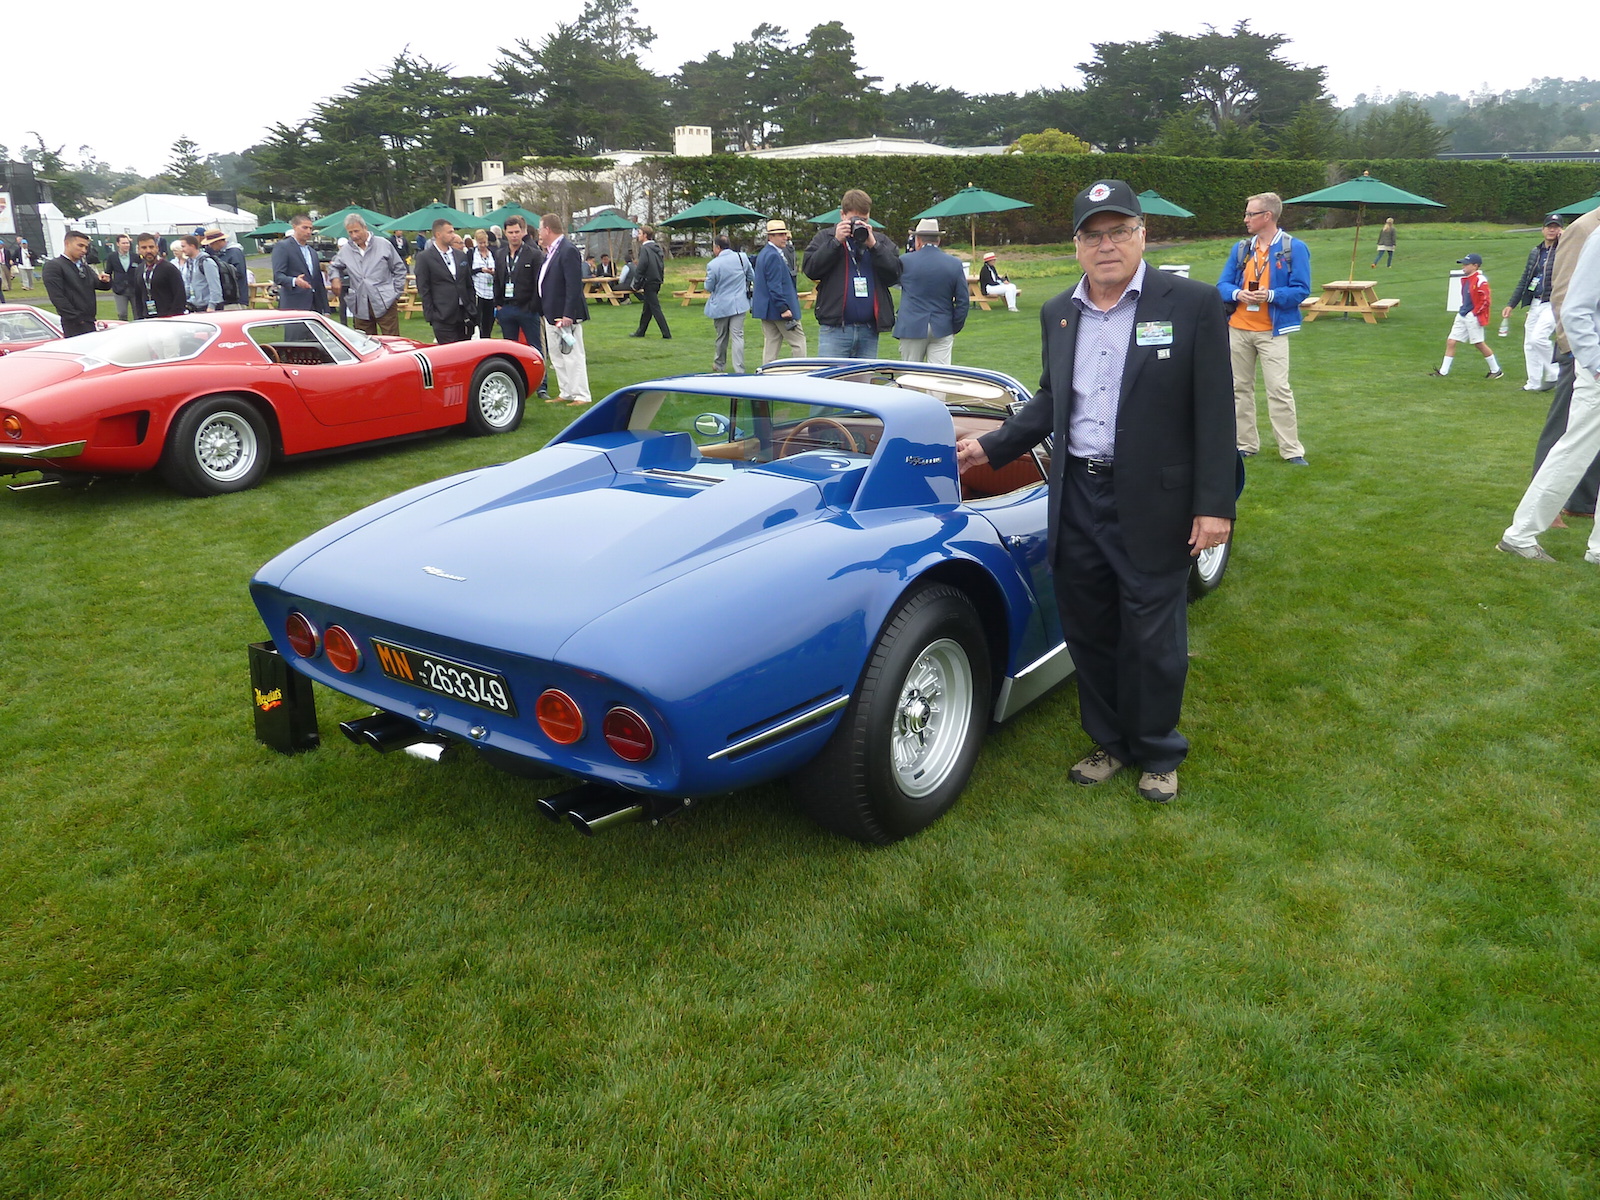 The Bizzarrini Class At Pebble Beach Was Awesome in 2016